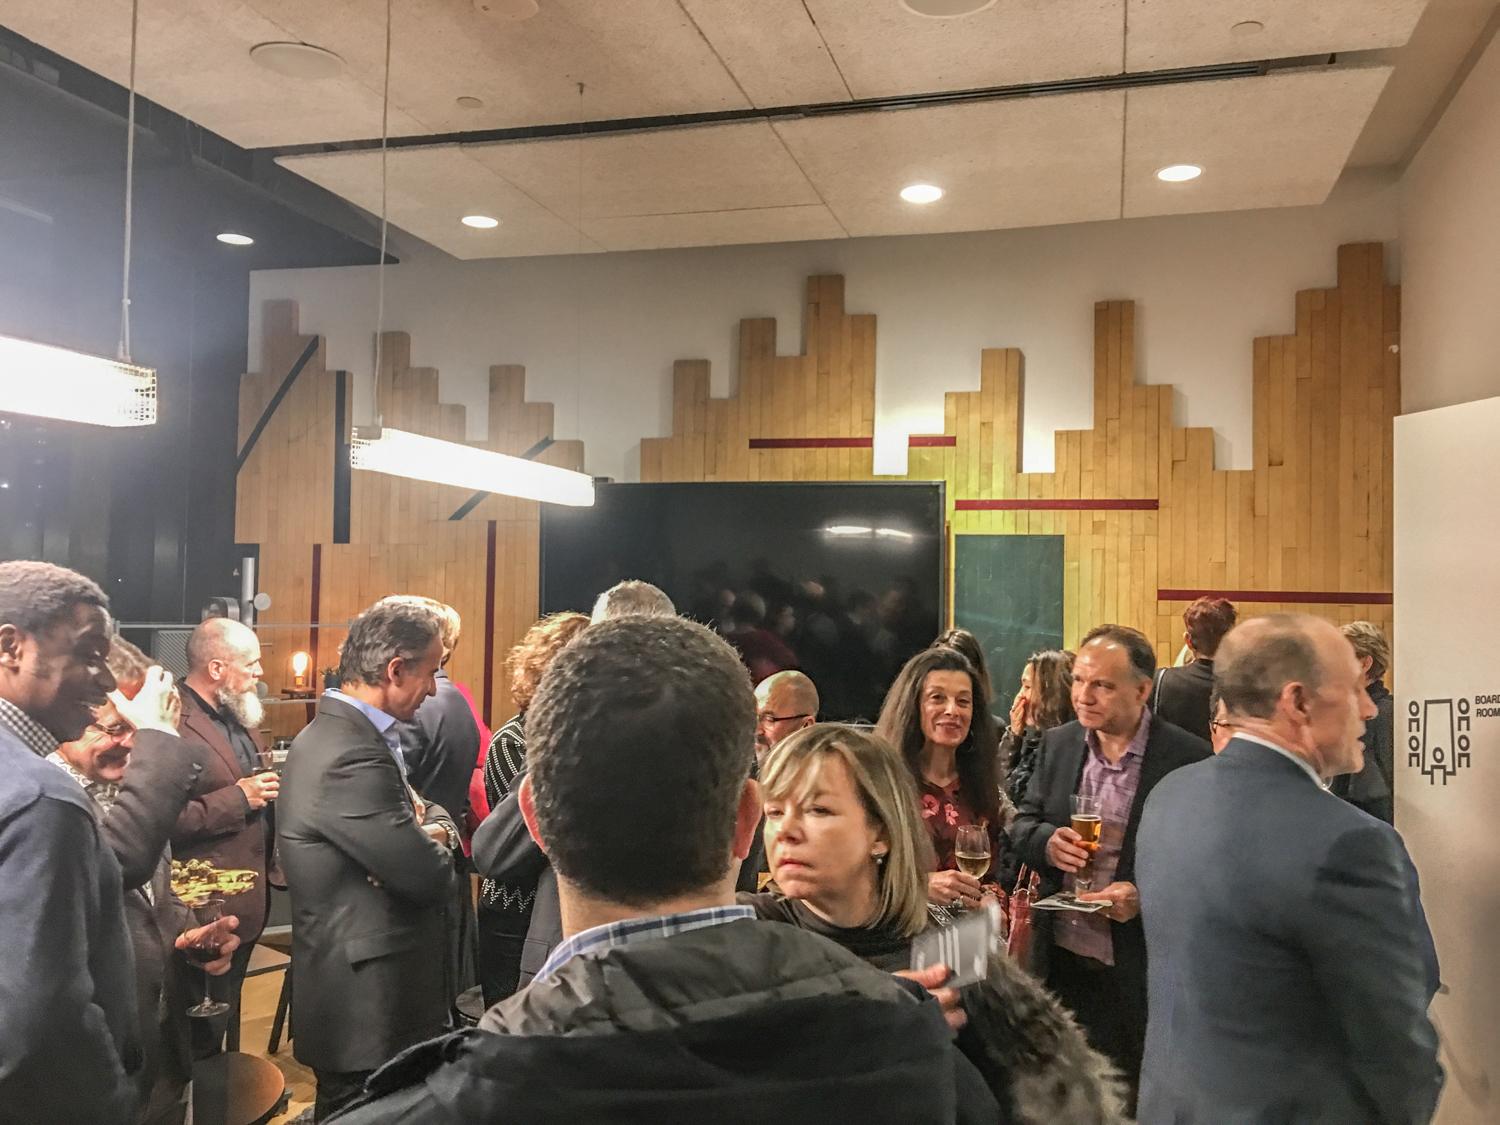 a crowd mingles in a boardroom that has repurposed gym flooring used as a wallcovering